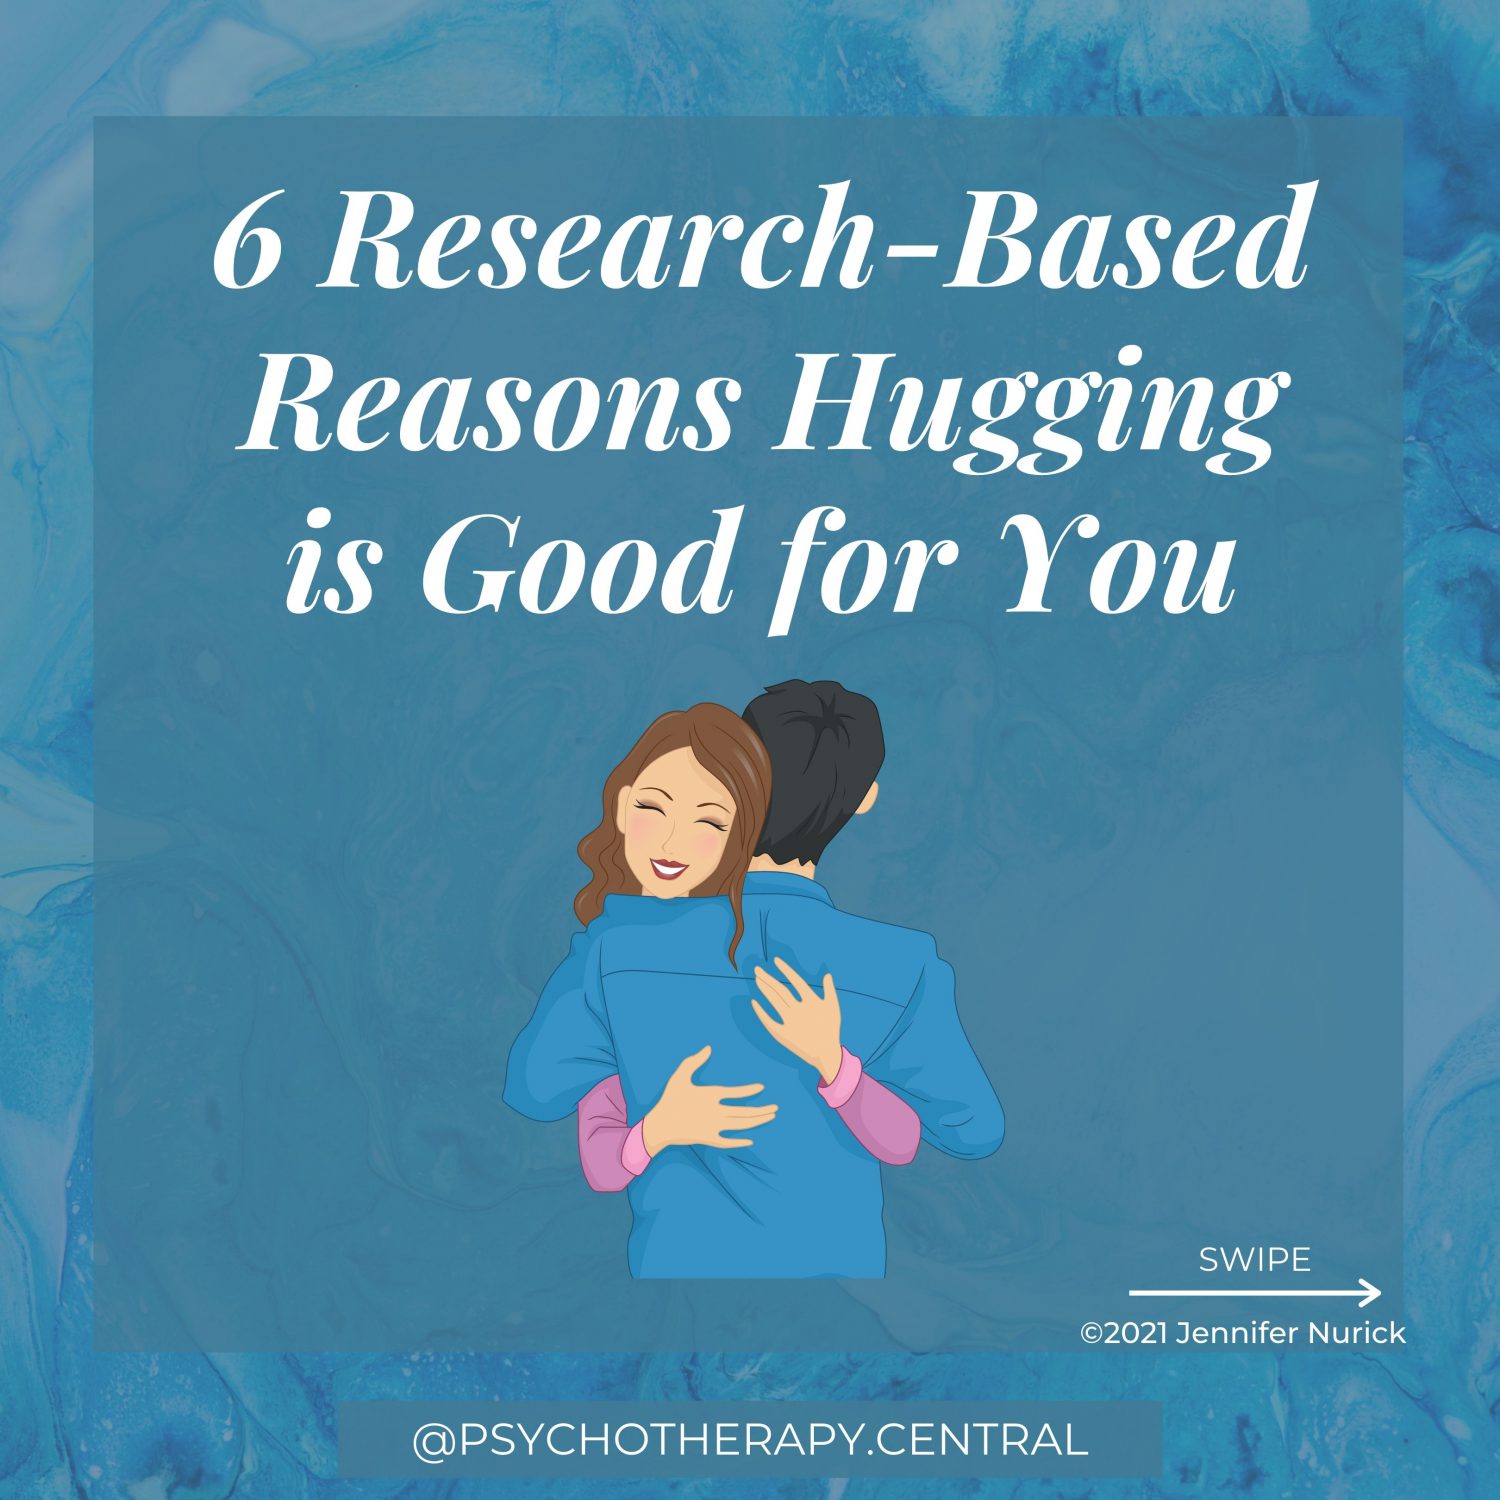 6 Research-Based Reasons Hugging is Good for You Research shows people who are hugged more have less severe illnesses Hugging can lower blood pressure Hugging can decrease your heart rate Hugging involves some deep pressure to the skin, which calms the autonomic nervous system (responsible for fight or flight) This deep pressure reduces the stress hormone cortisol During a hug, we release oxytocin (the bonding hormone) which reduces stress